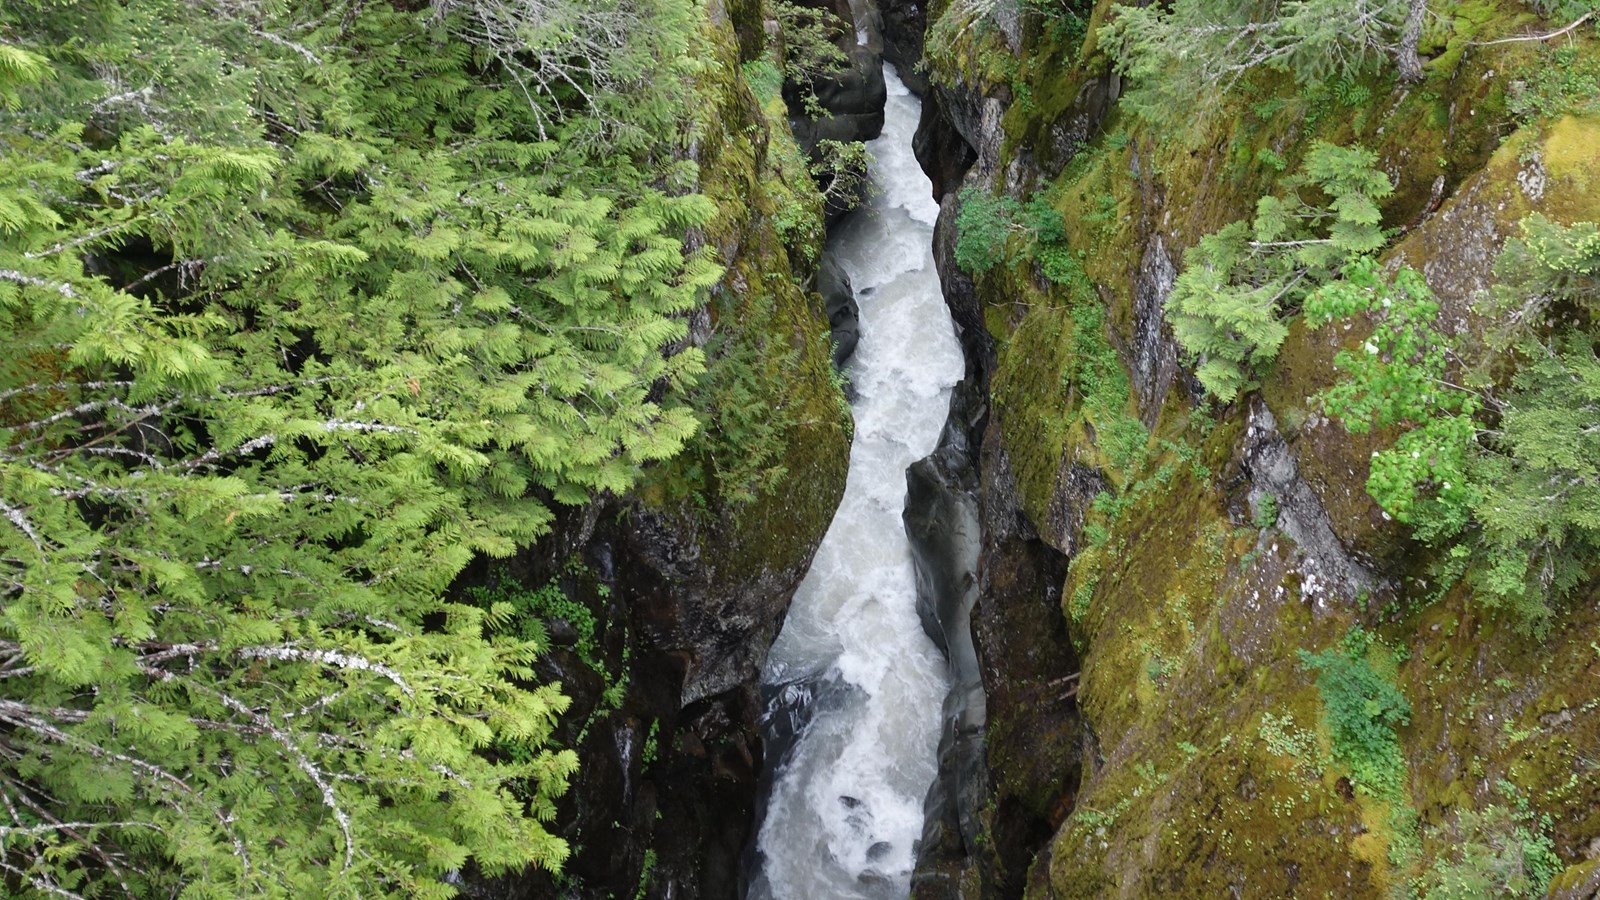 A very narrow canyon, rock walls covered in moss and plants, with a rushing white river.